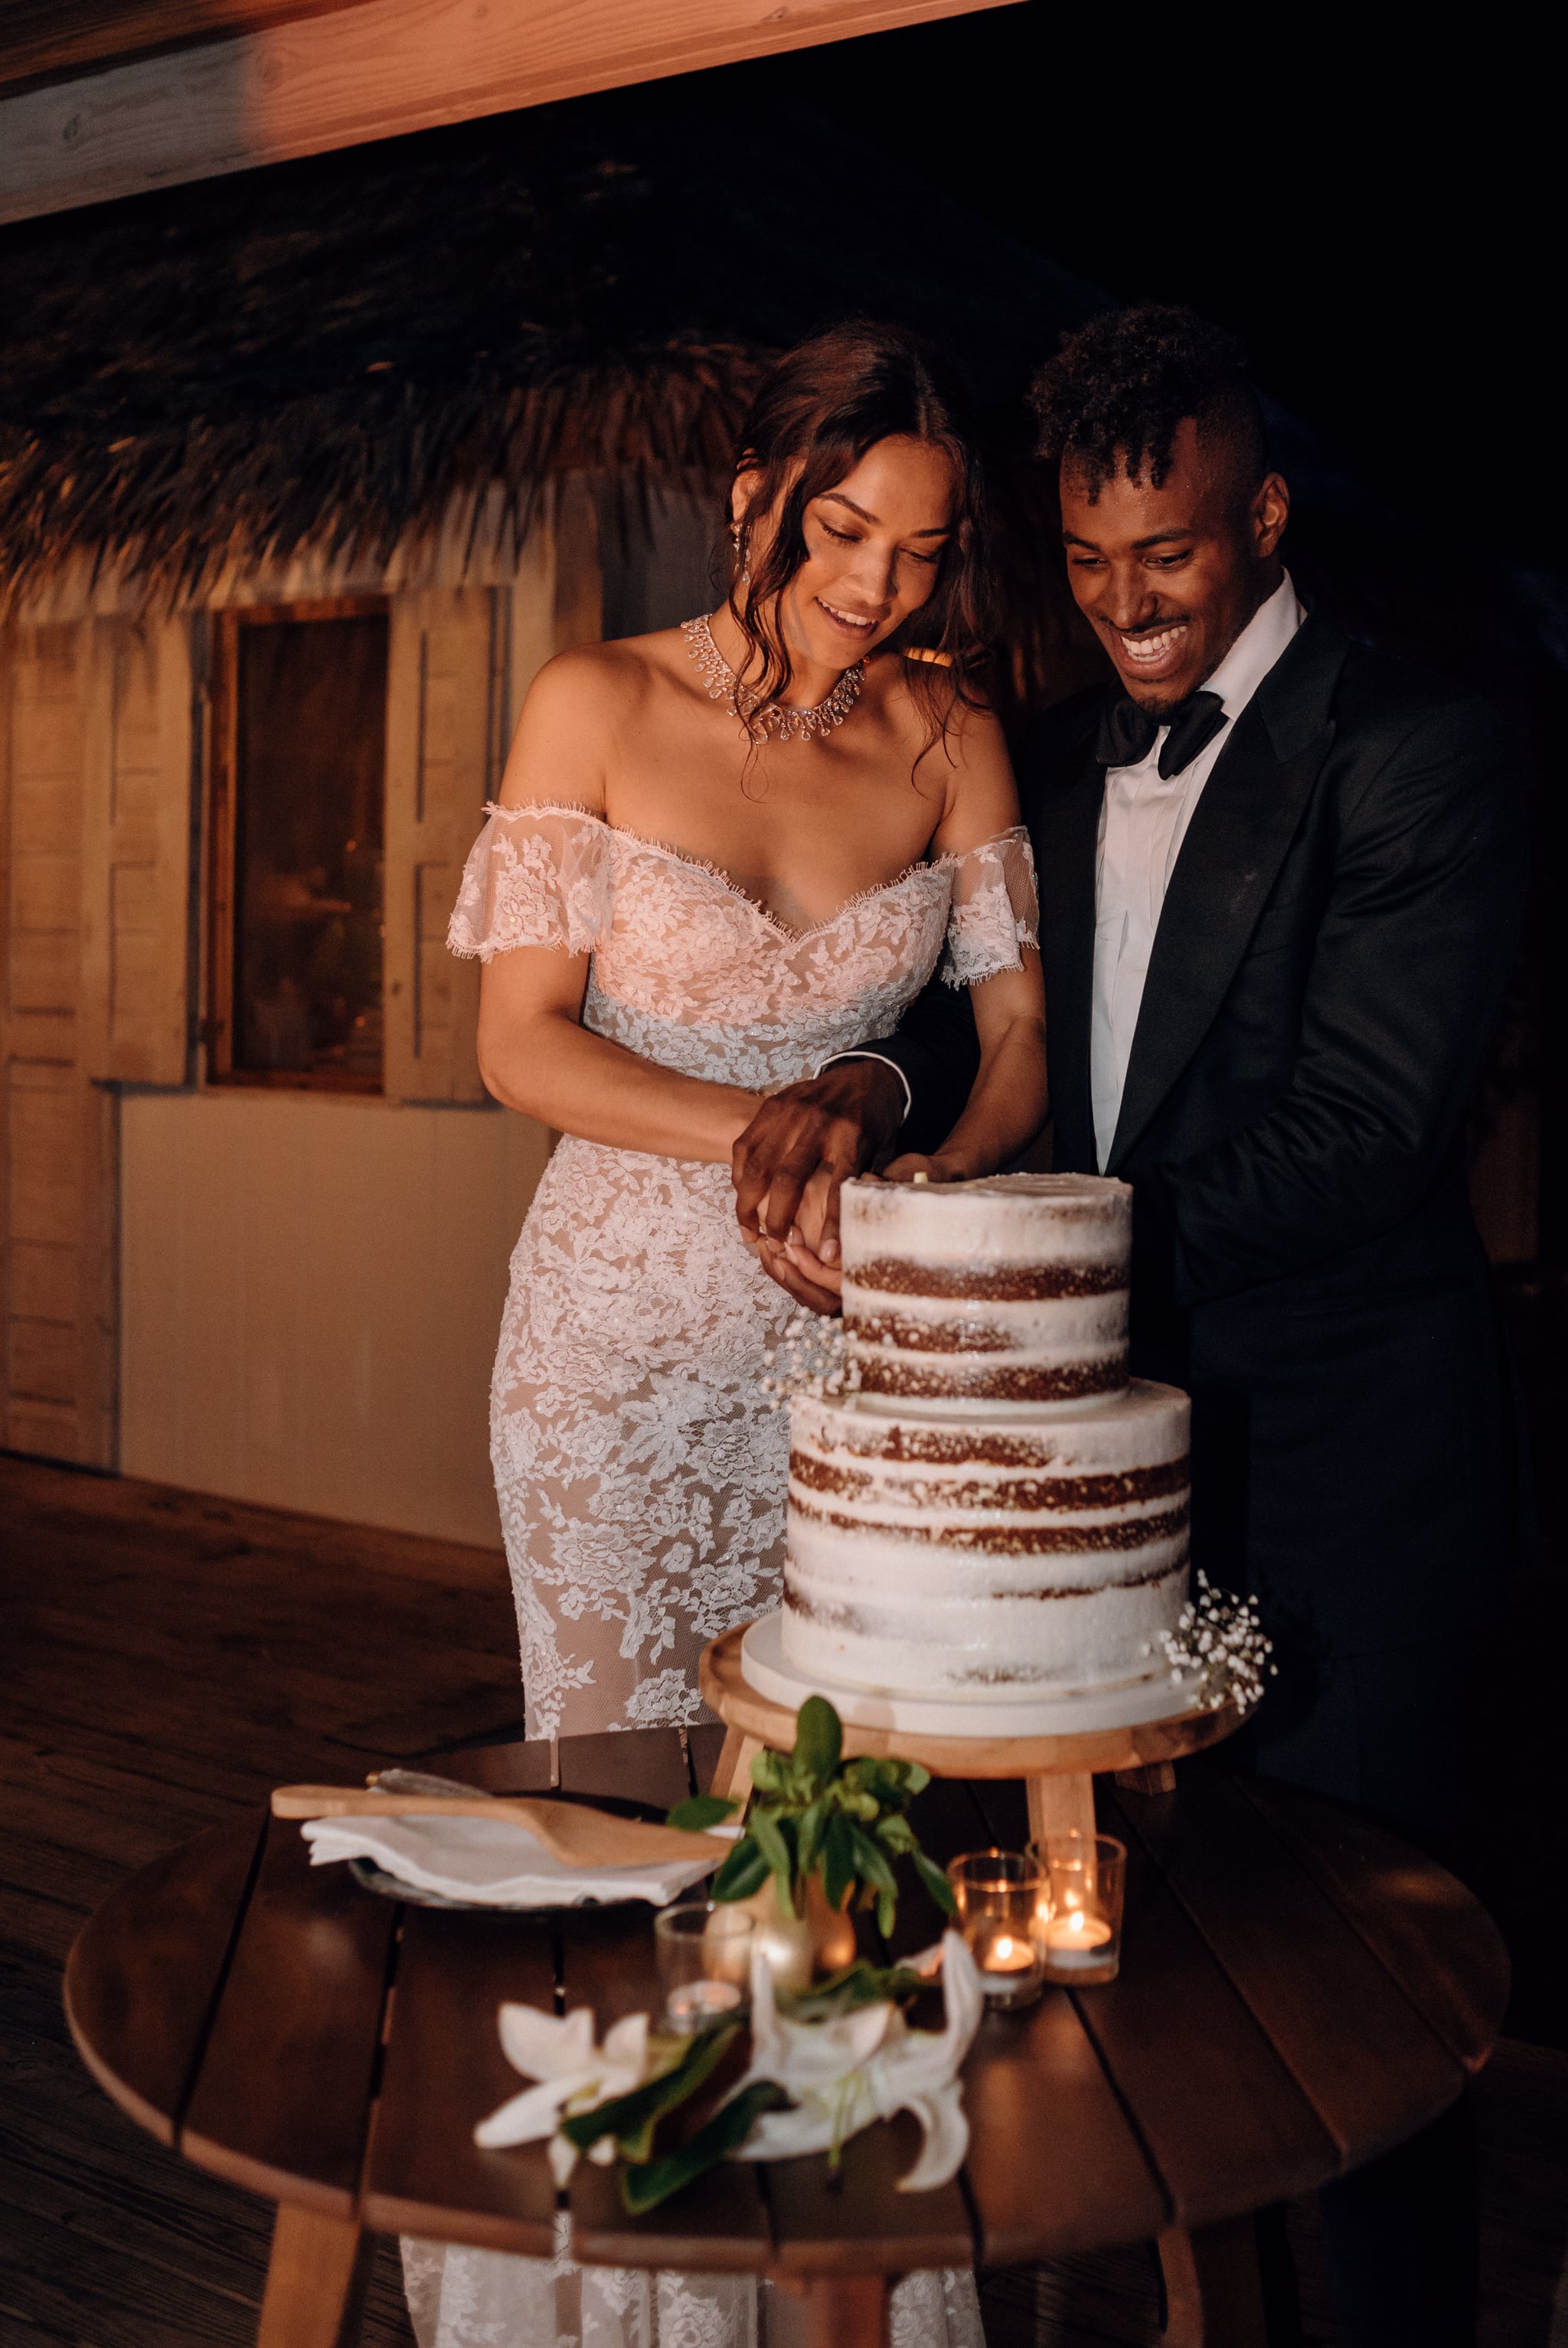 inkompetence argument Så mange The Groom Wore a Tom Ford Tuxedo | Oh My! This Bride's Supersheer Wedding  Dress Is What Dreams Are Made Of | POPSUGAR Fashion Photo 16